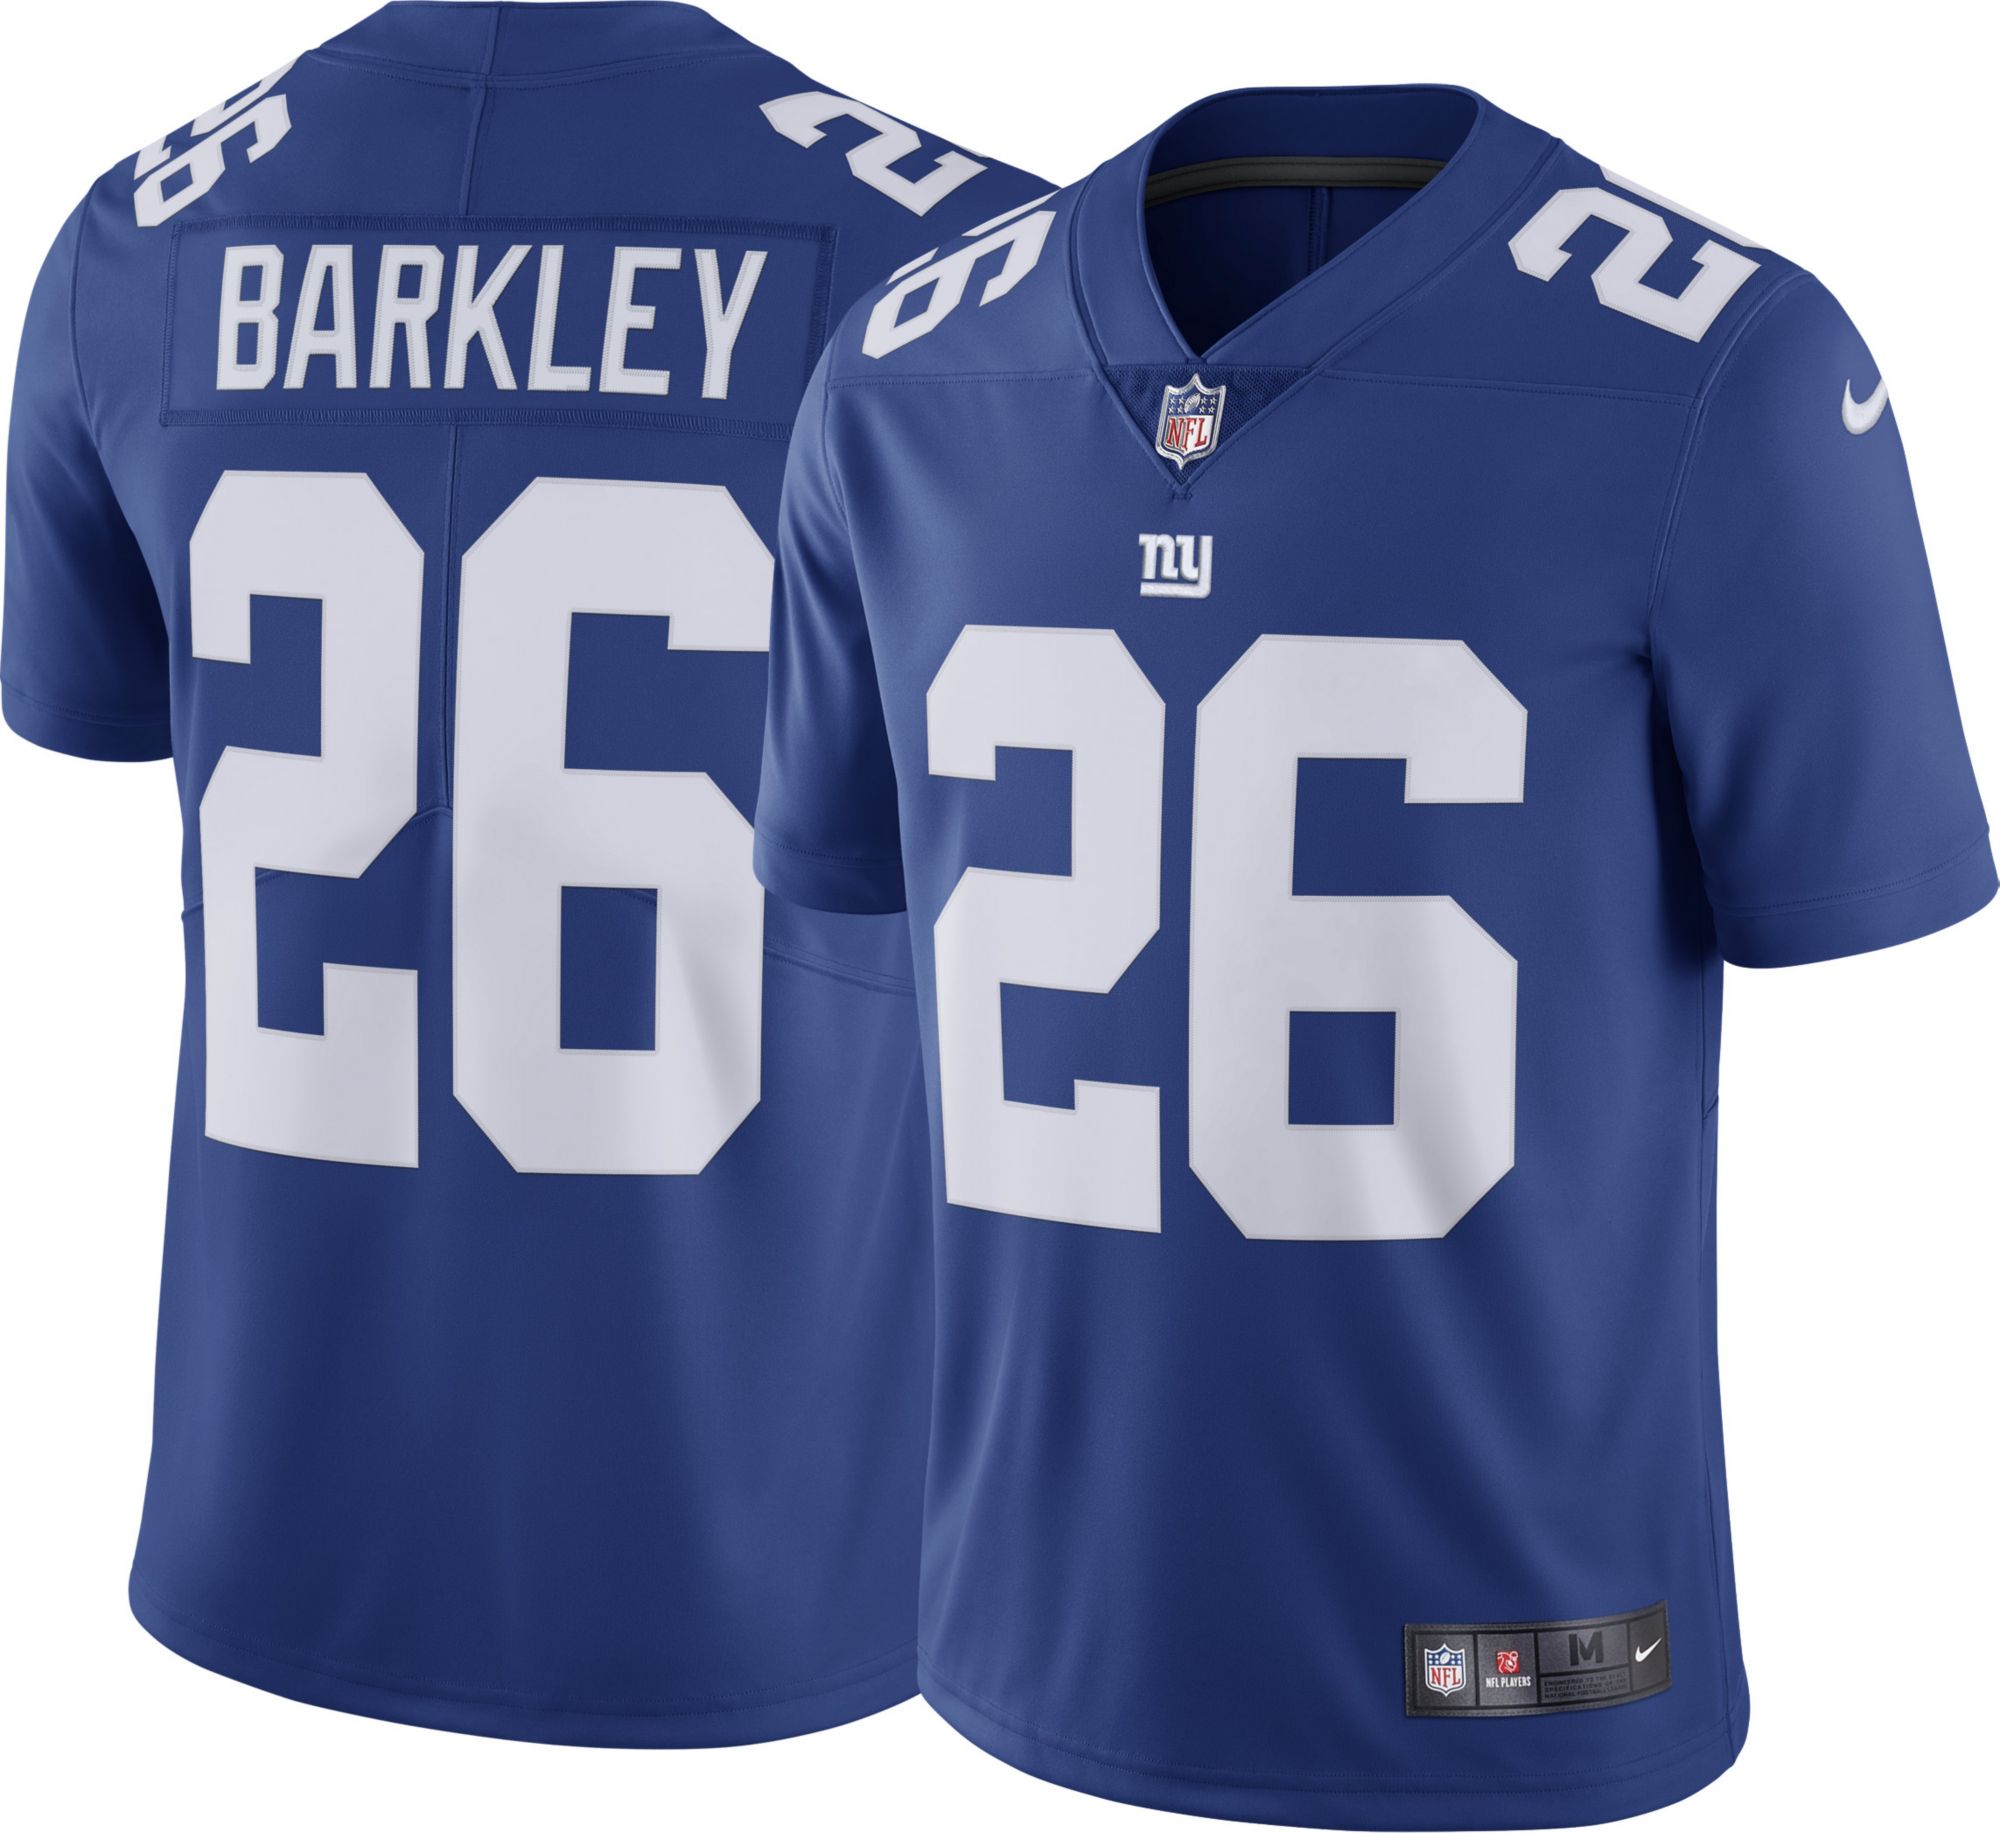  Saquon Barkley New York Giants #26 Blue Youth Player Home  Jersey (4-5) : Sports & Outdoors